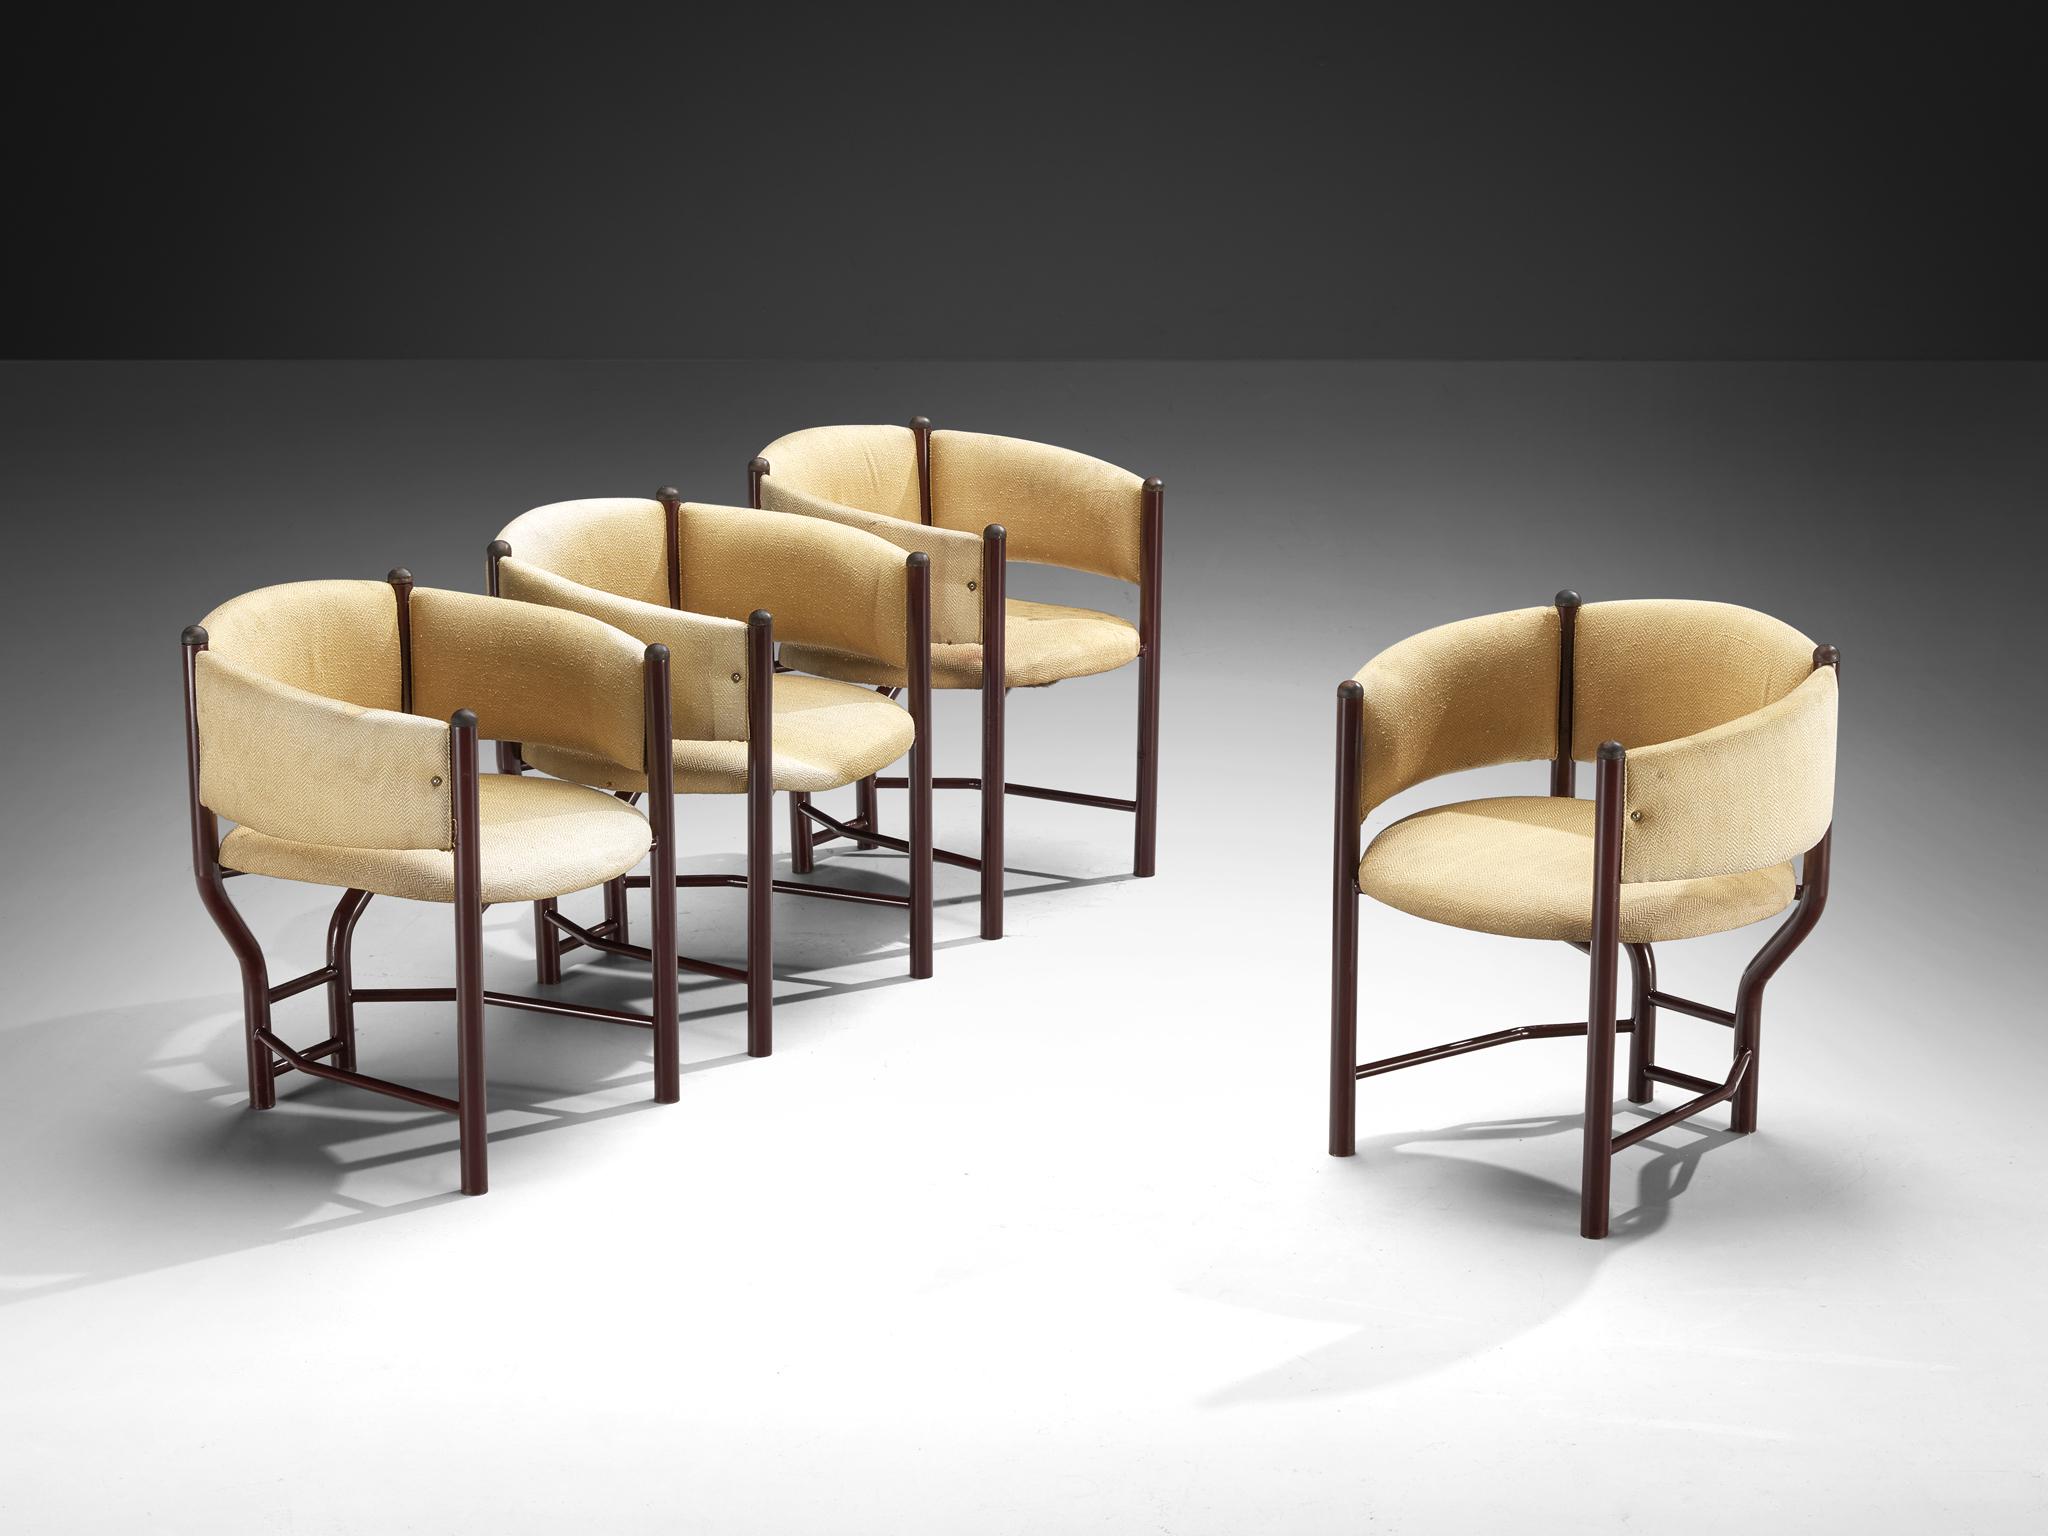 Set of four dining chairs, fabric, coated steel, wood, Italy, 1960s

These Italian-designed armchairs are characterized by their striking sculptural silhouette, featuring sculpted lines and sharply angled contours. The backrest elegantly curves into